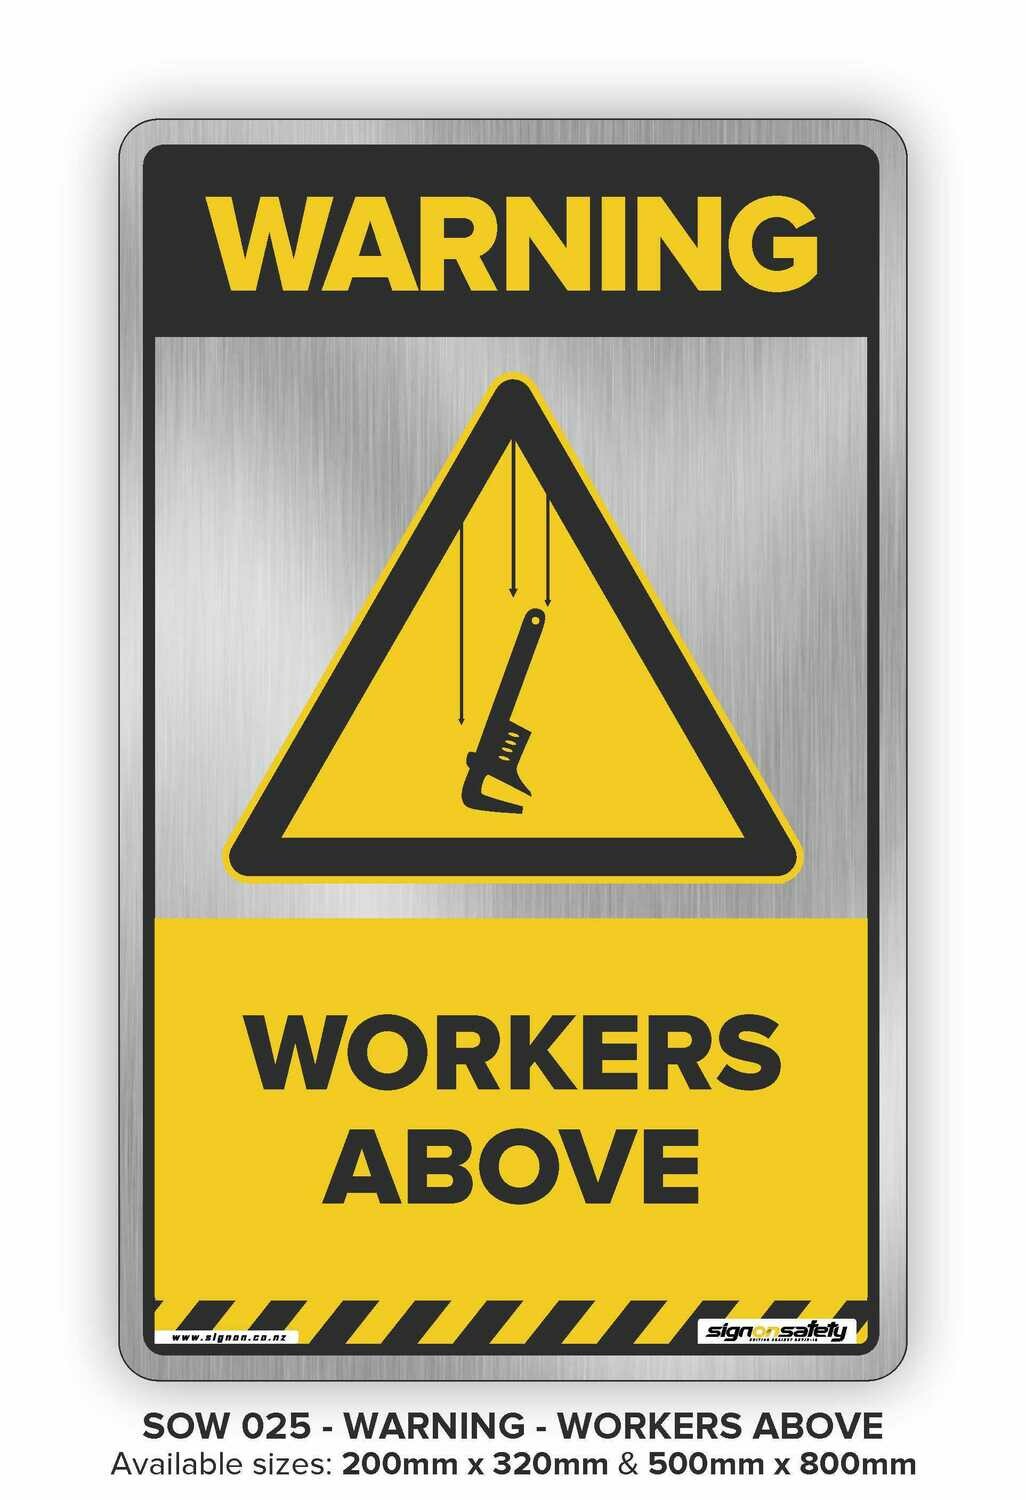 Warning - Workers Above